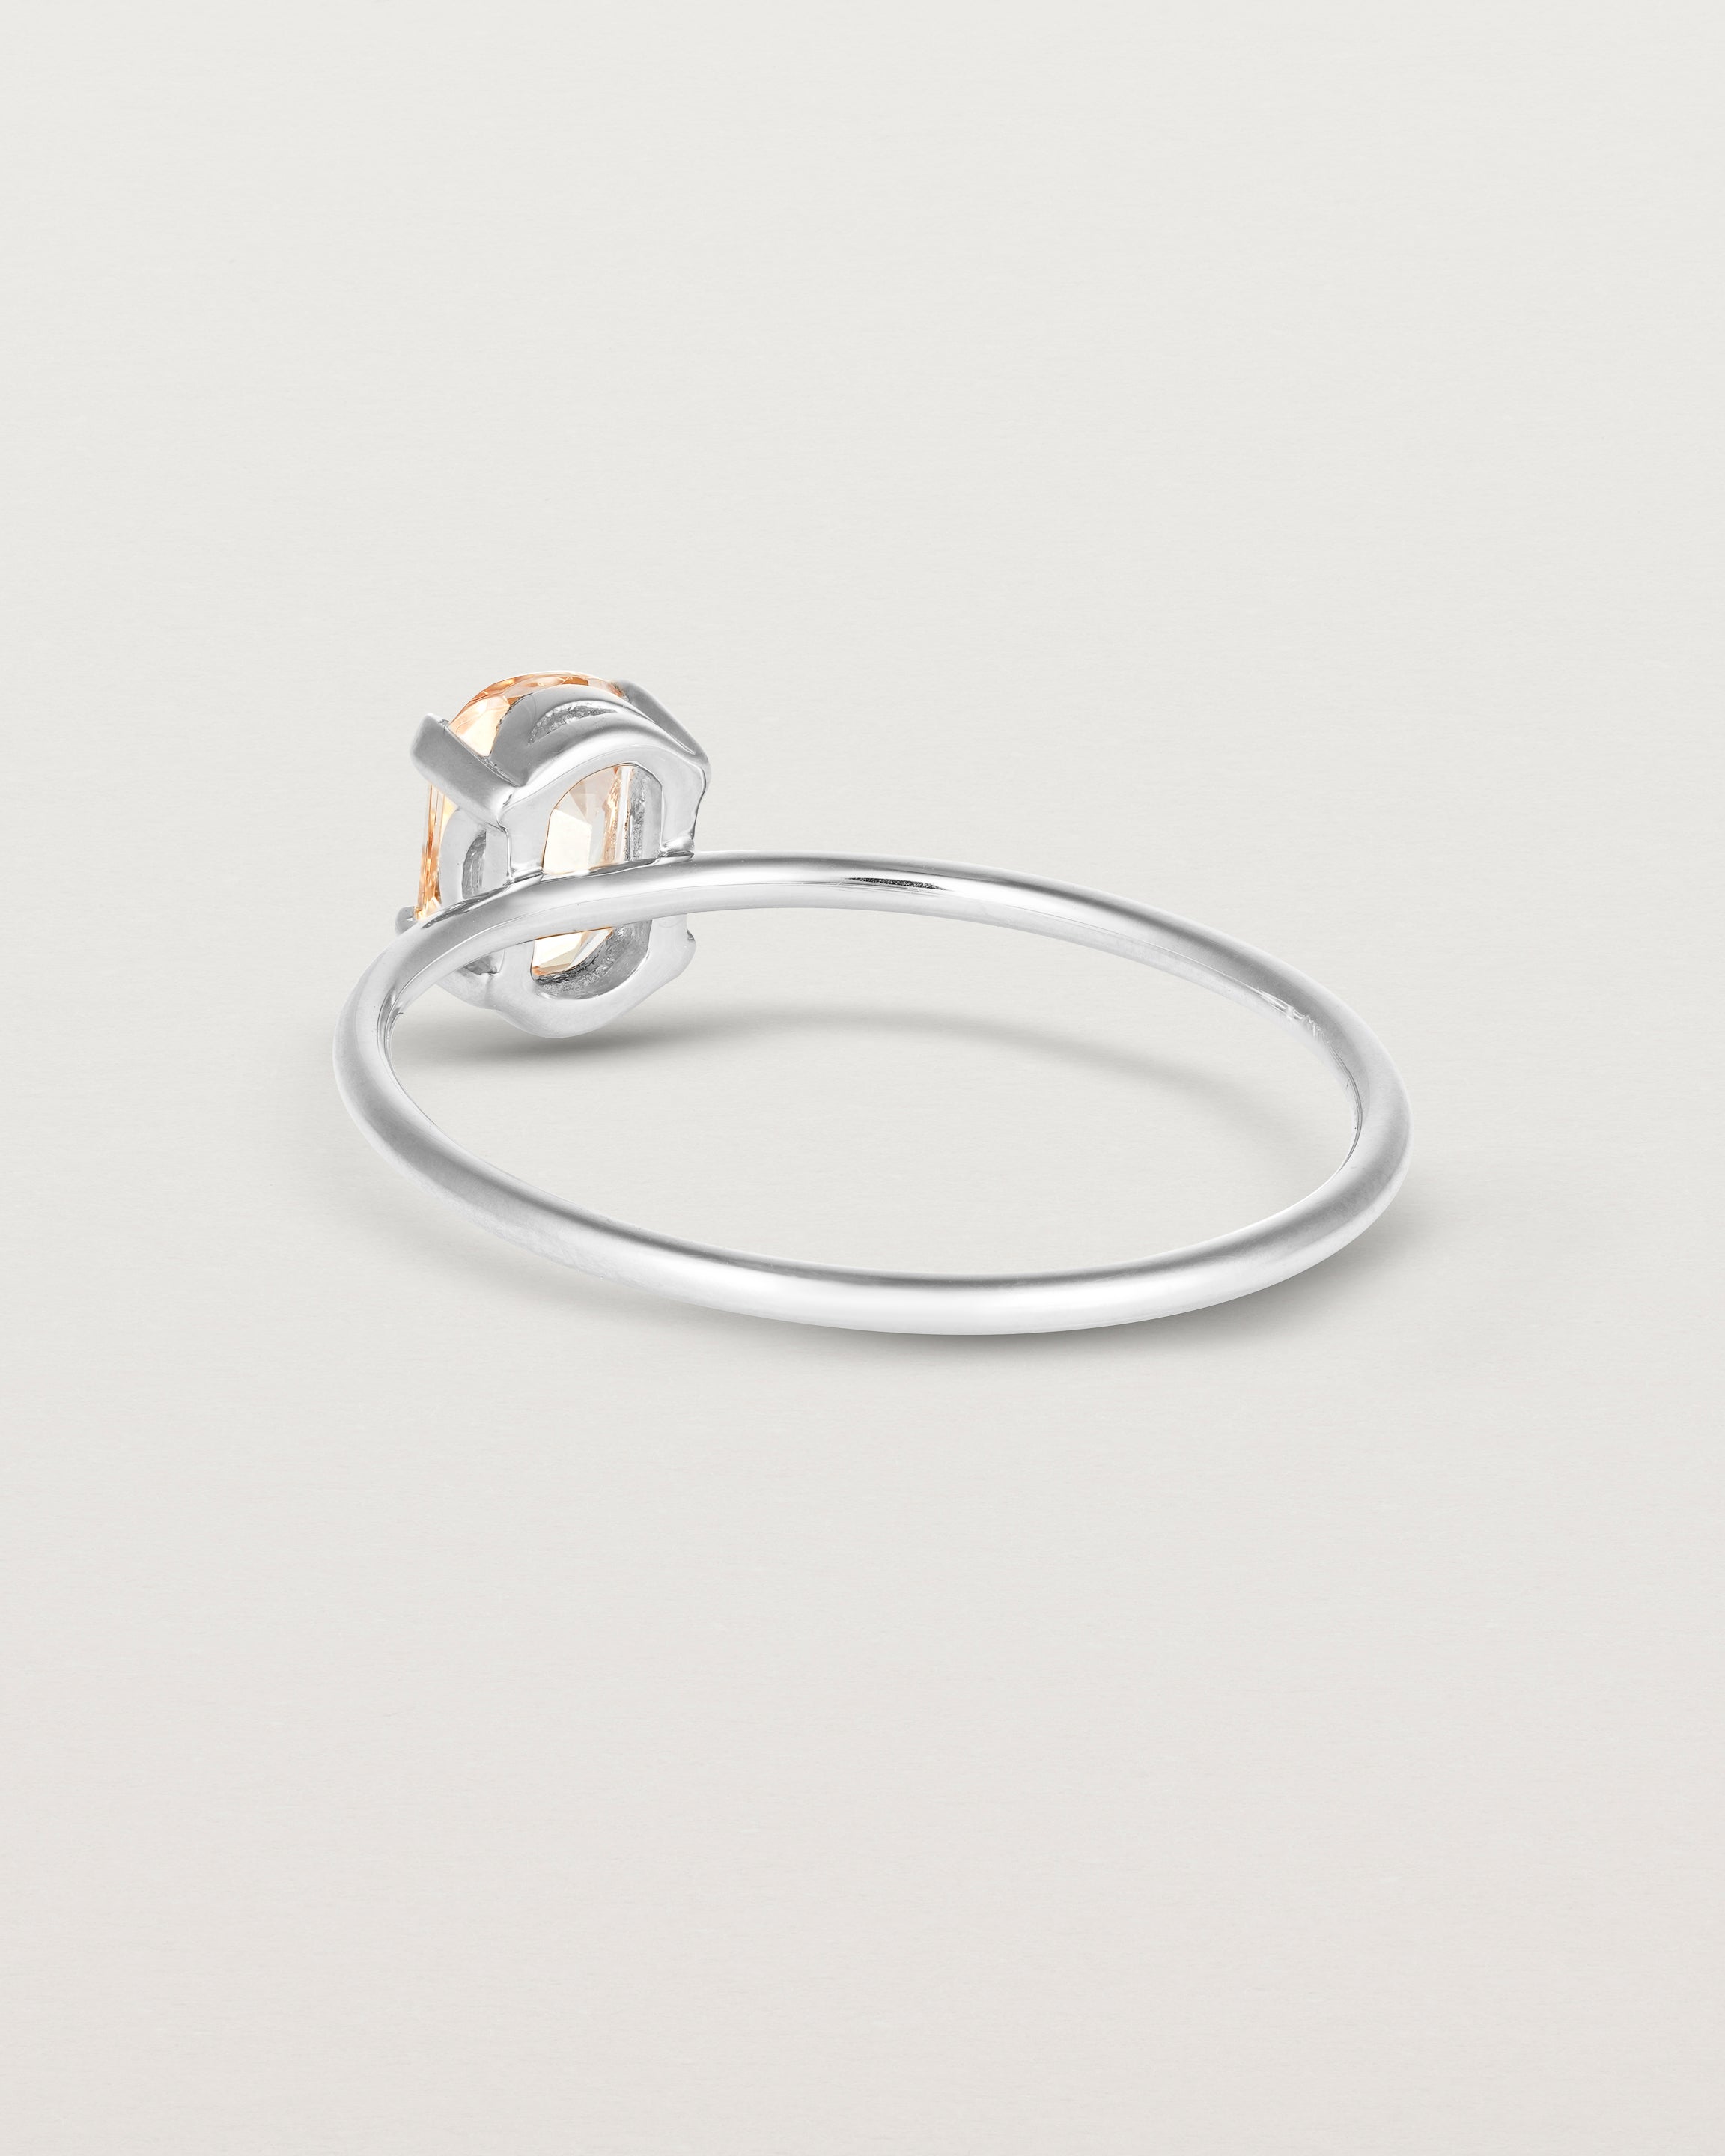 Back view of the Tiny Fei Ring | Morganite in sterling silver.